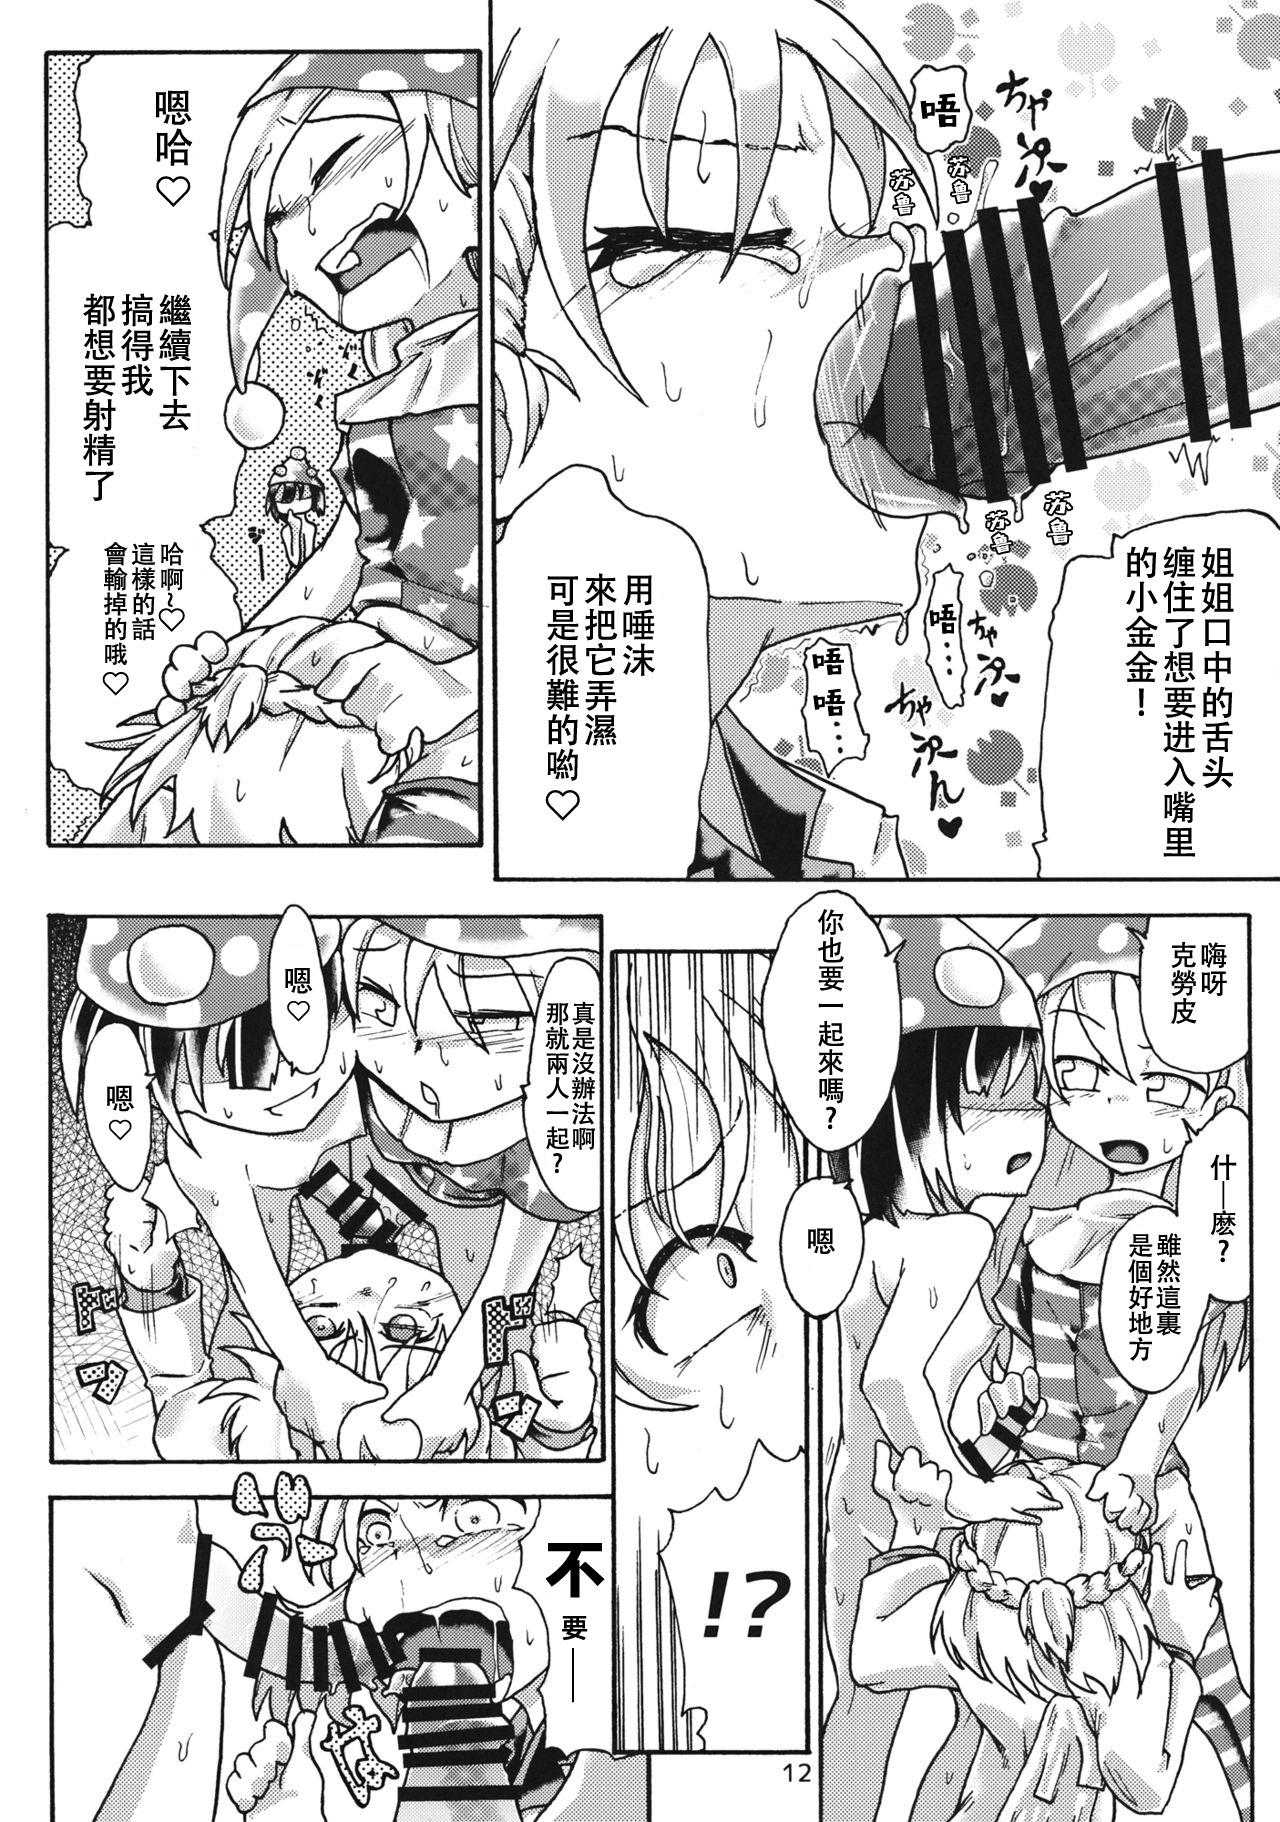 Lesbian Porn Creeping! - Touhou project Gay Spank - Page 11